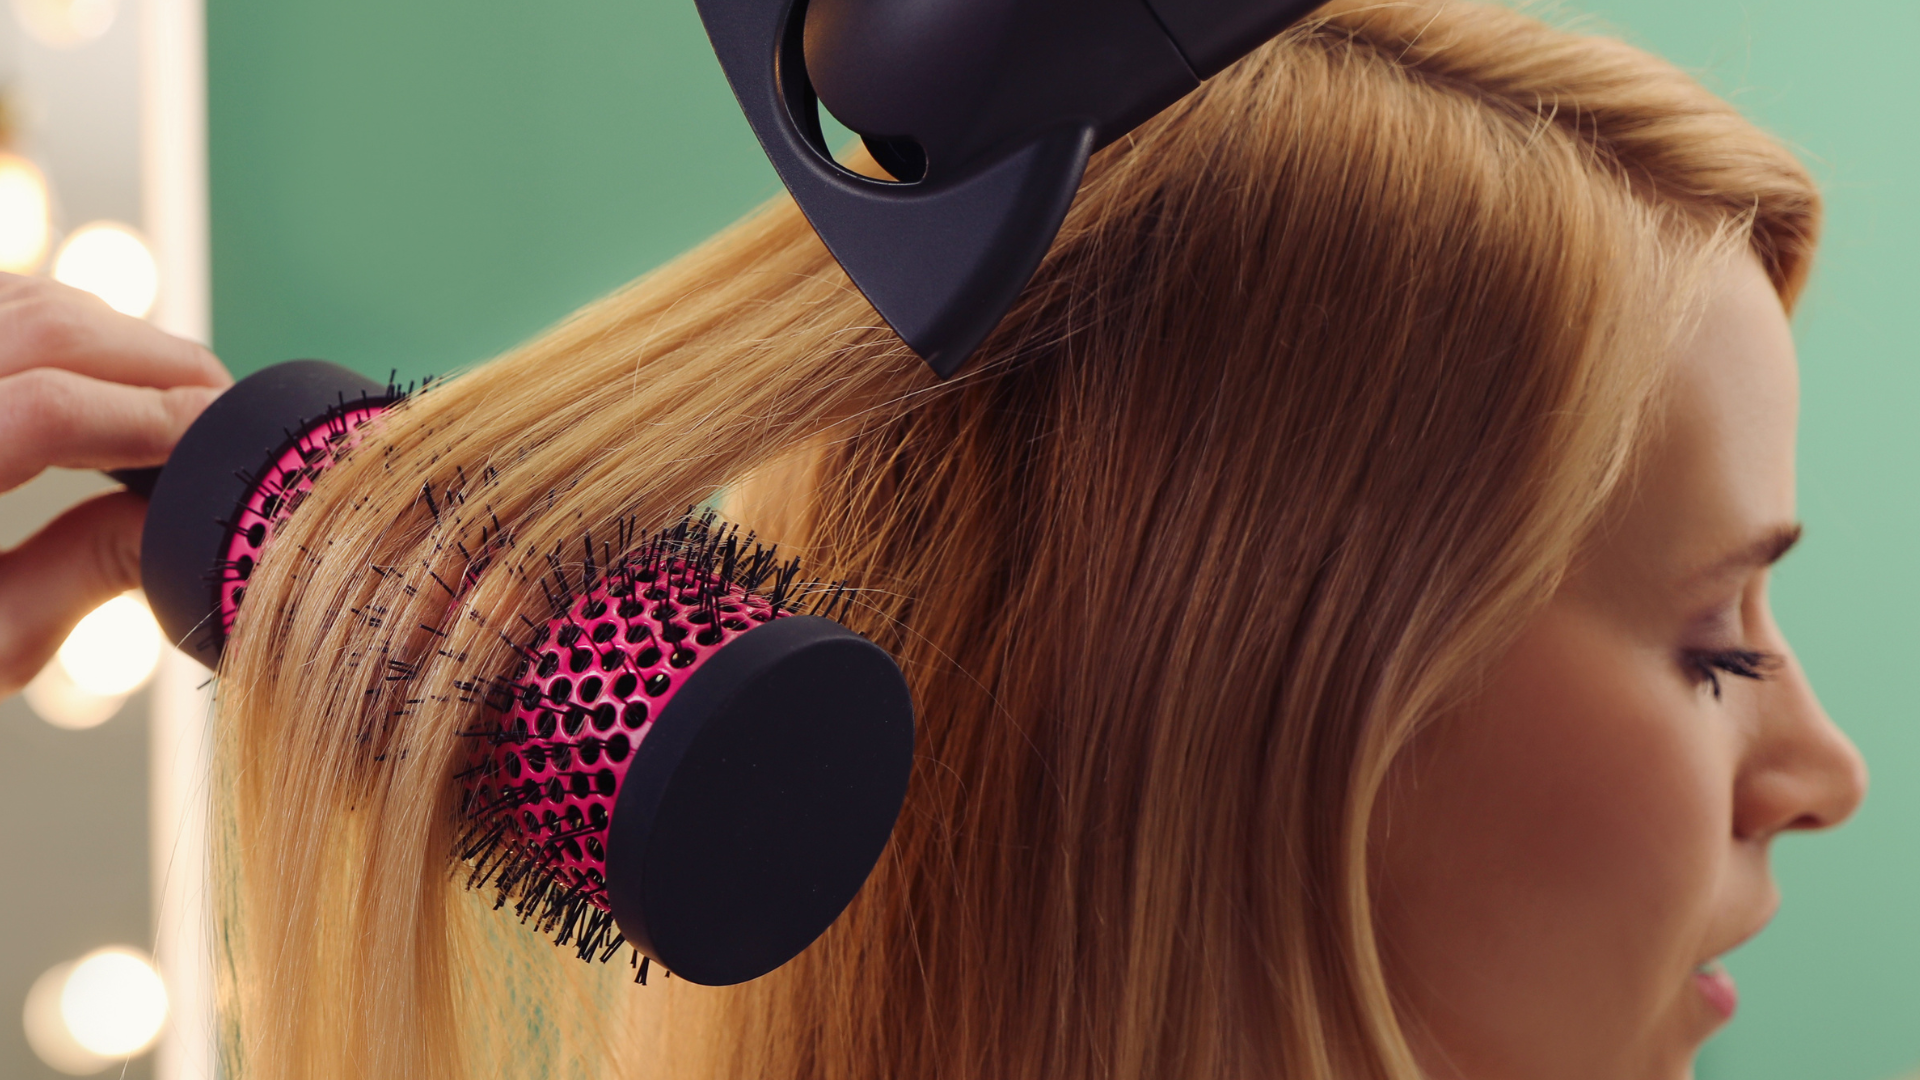 How Redheads Can Choose the Right Size Round Hairbrush